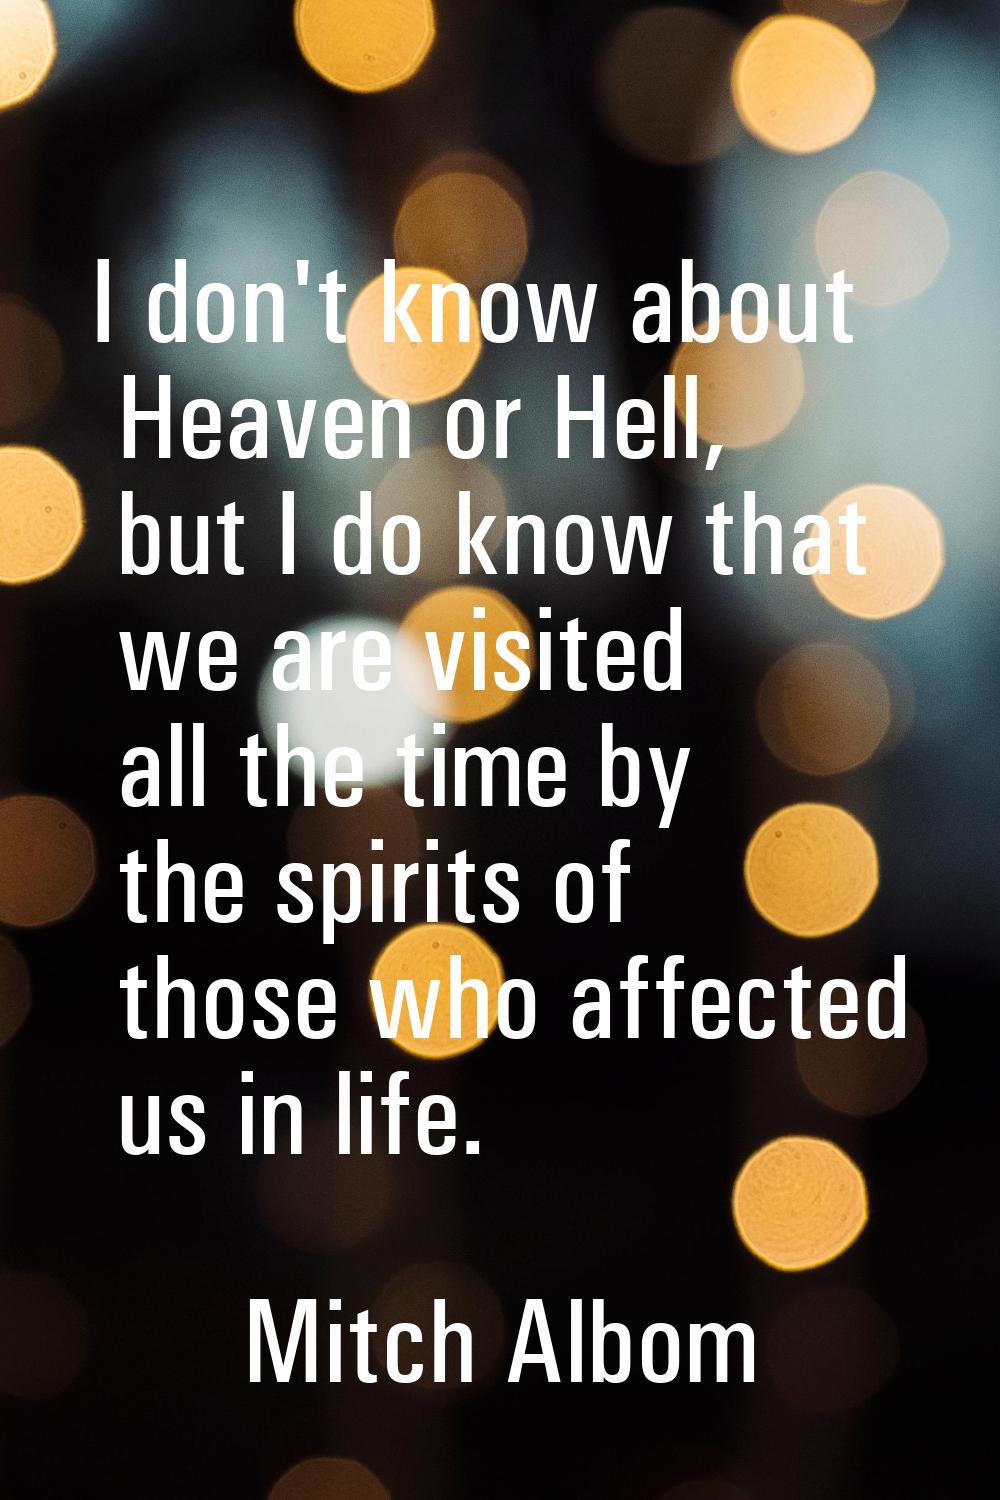 I don't know about Heaven or Hell, but I do know that we are visited all the time by the spirits of